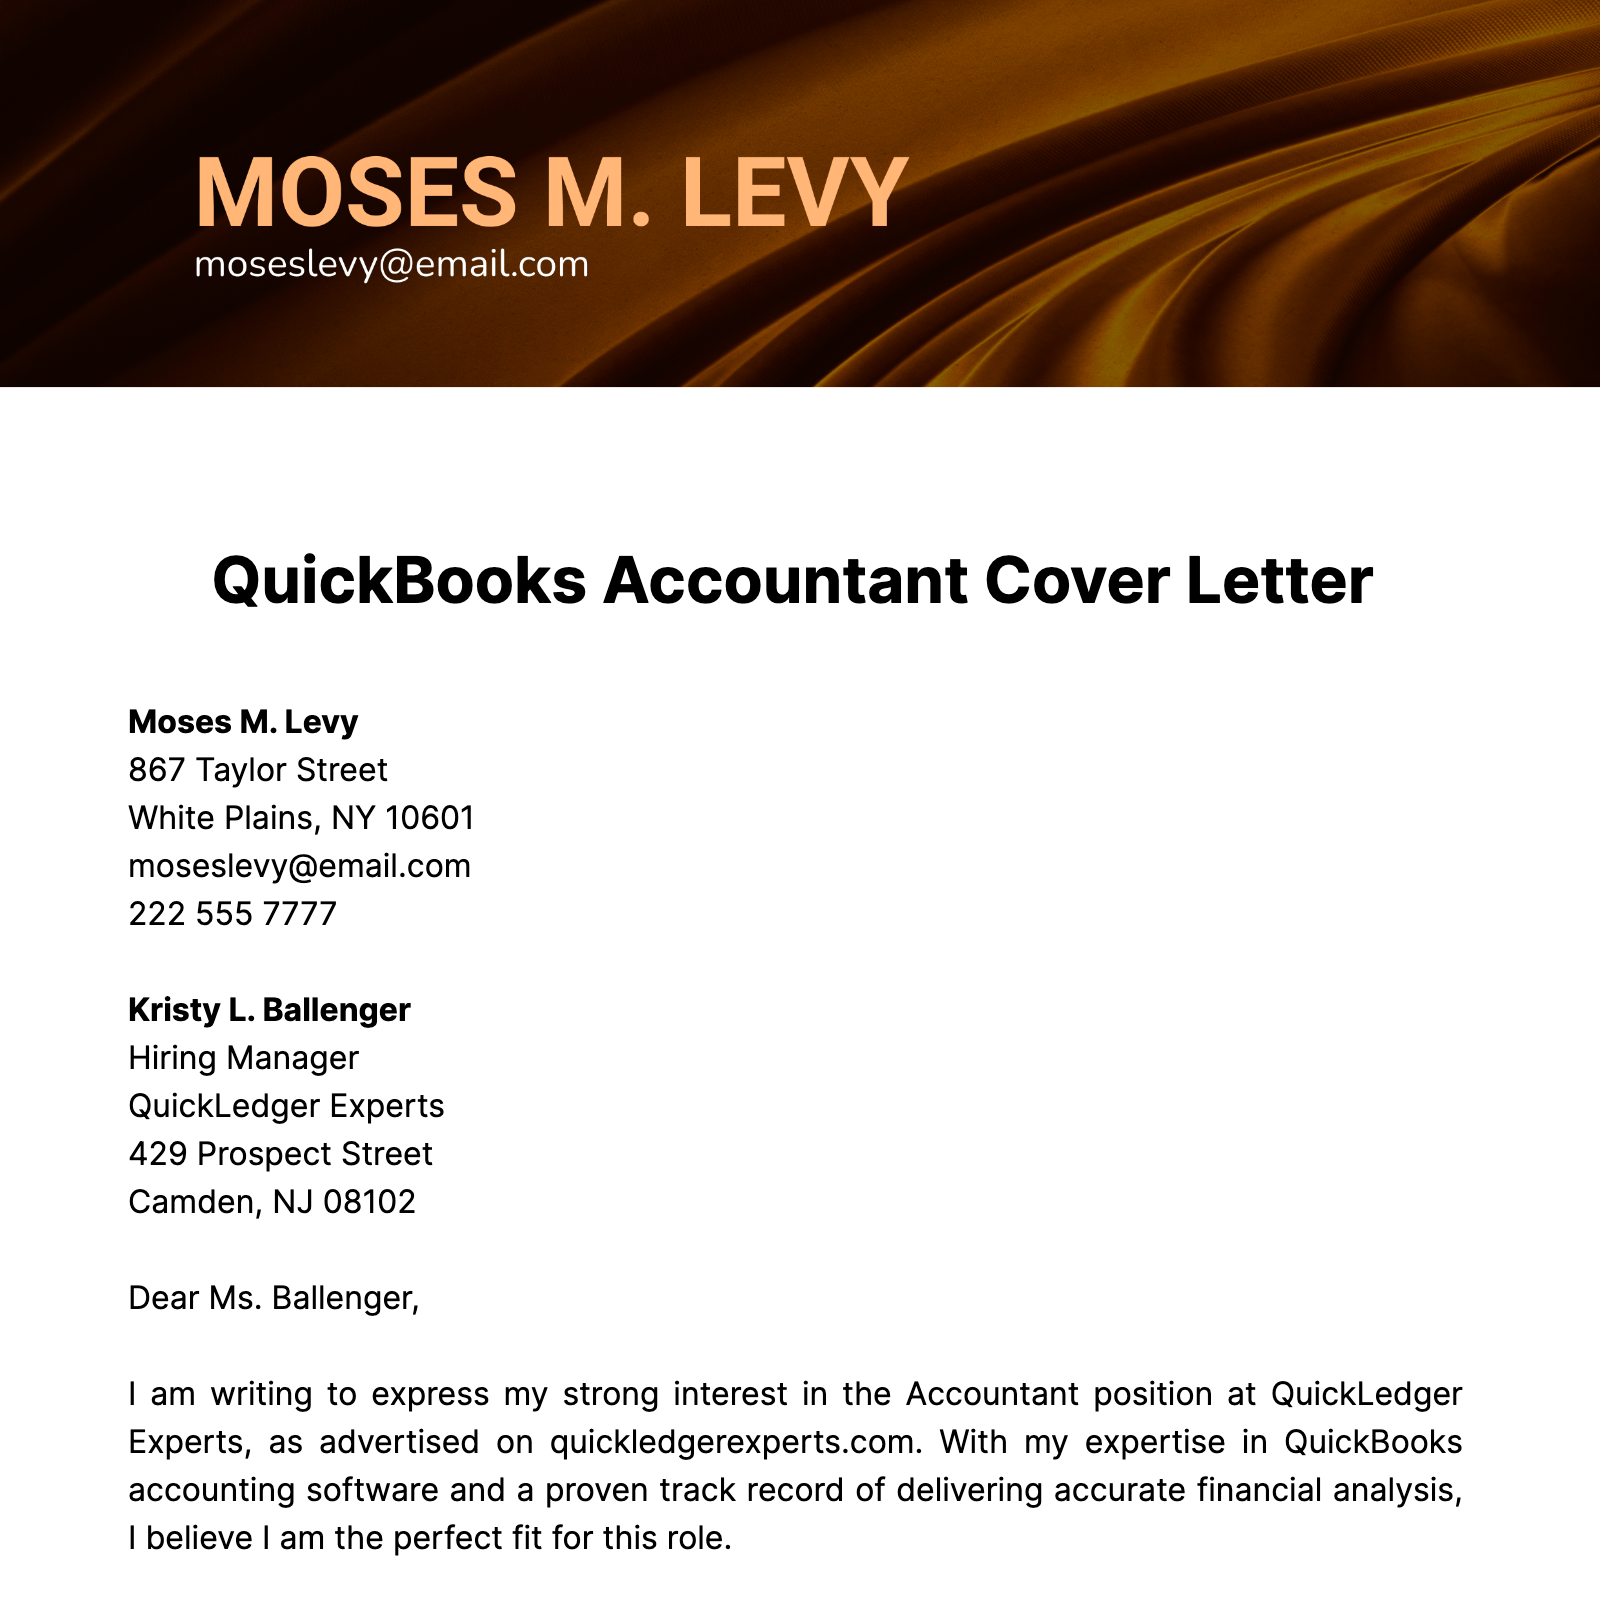 QuickBooks Accountant Cover Letter Template